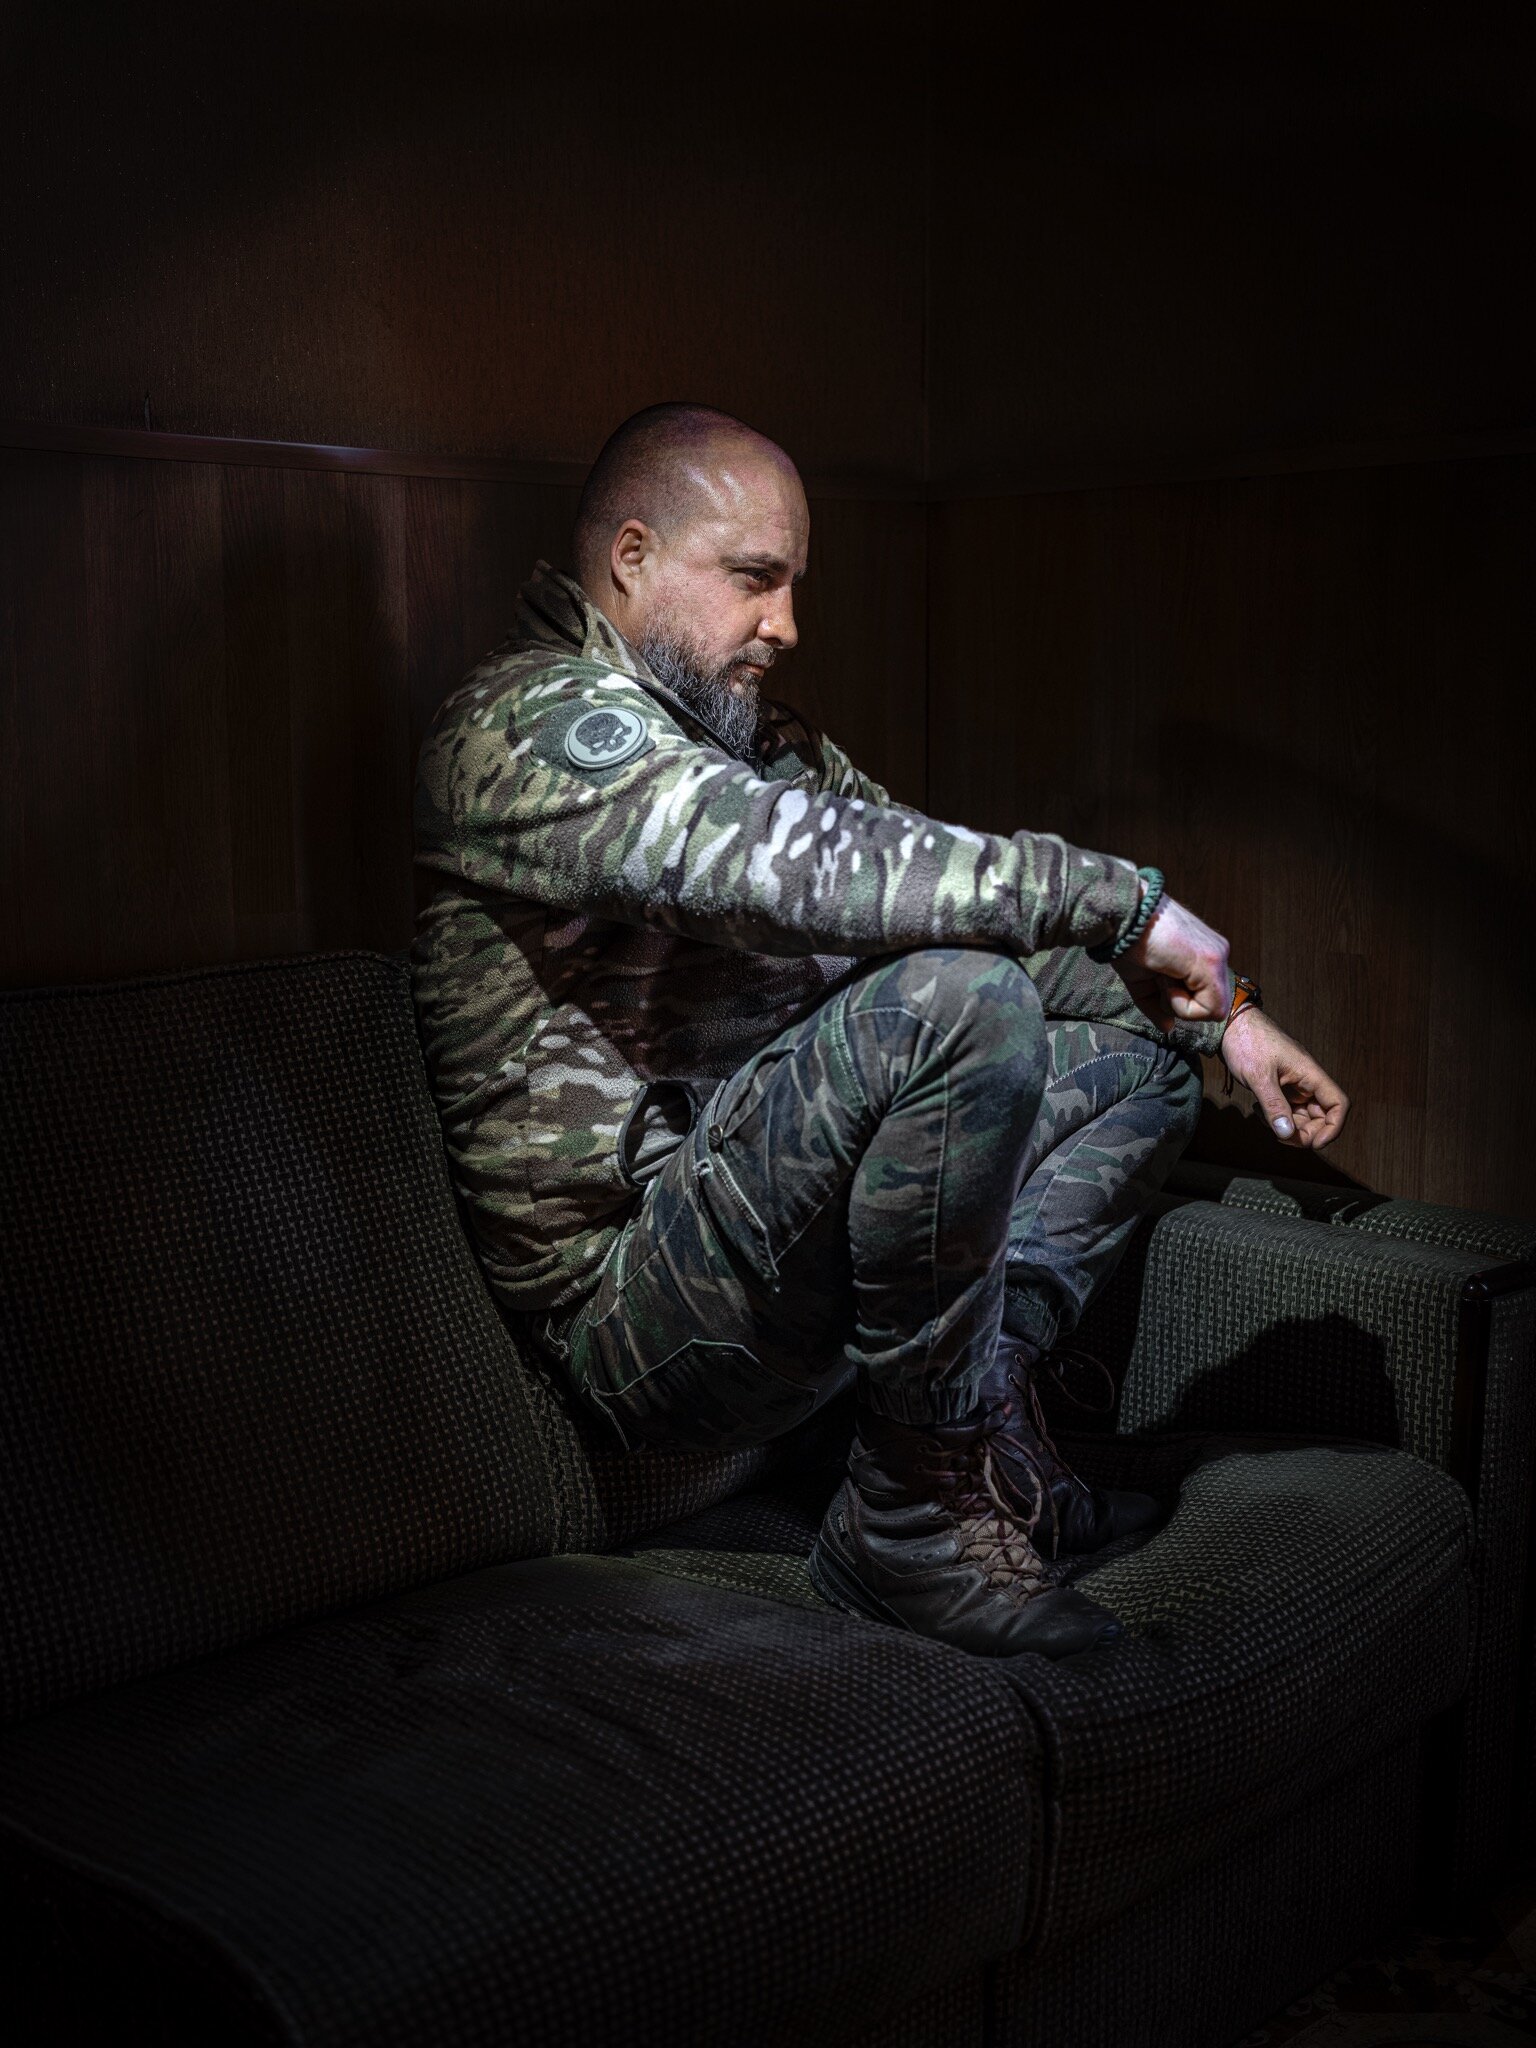 19mag-Ukraine-09-mobileMasterAt3x ‘I Live in Hell’: The Psychic Wounds of Ukraine’s Soldiers